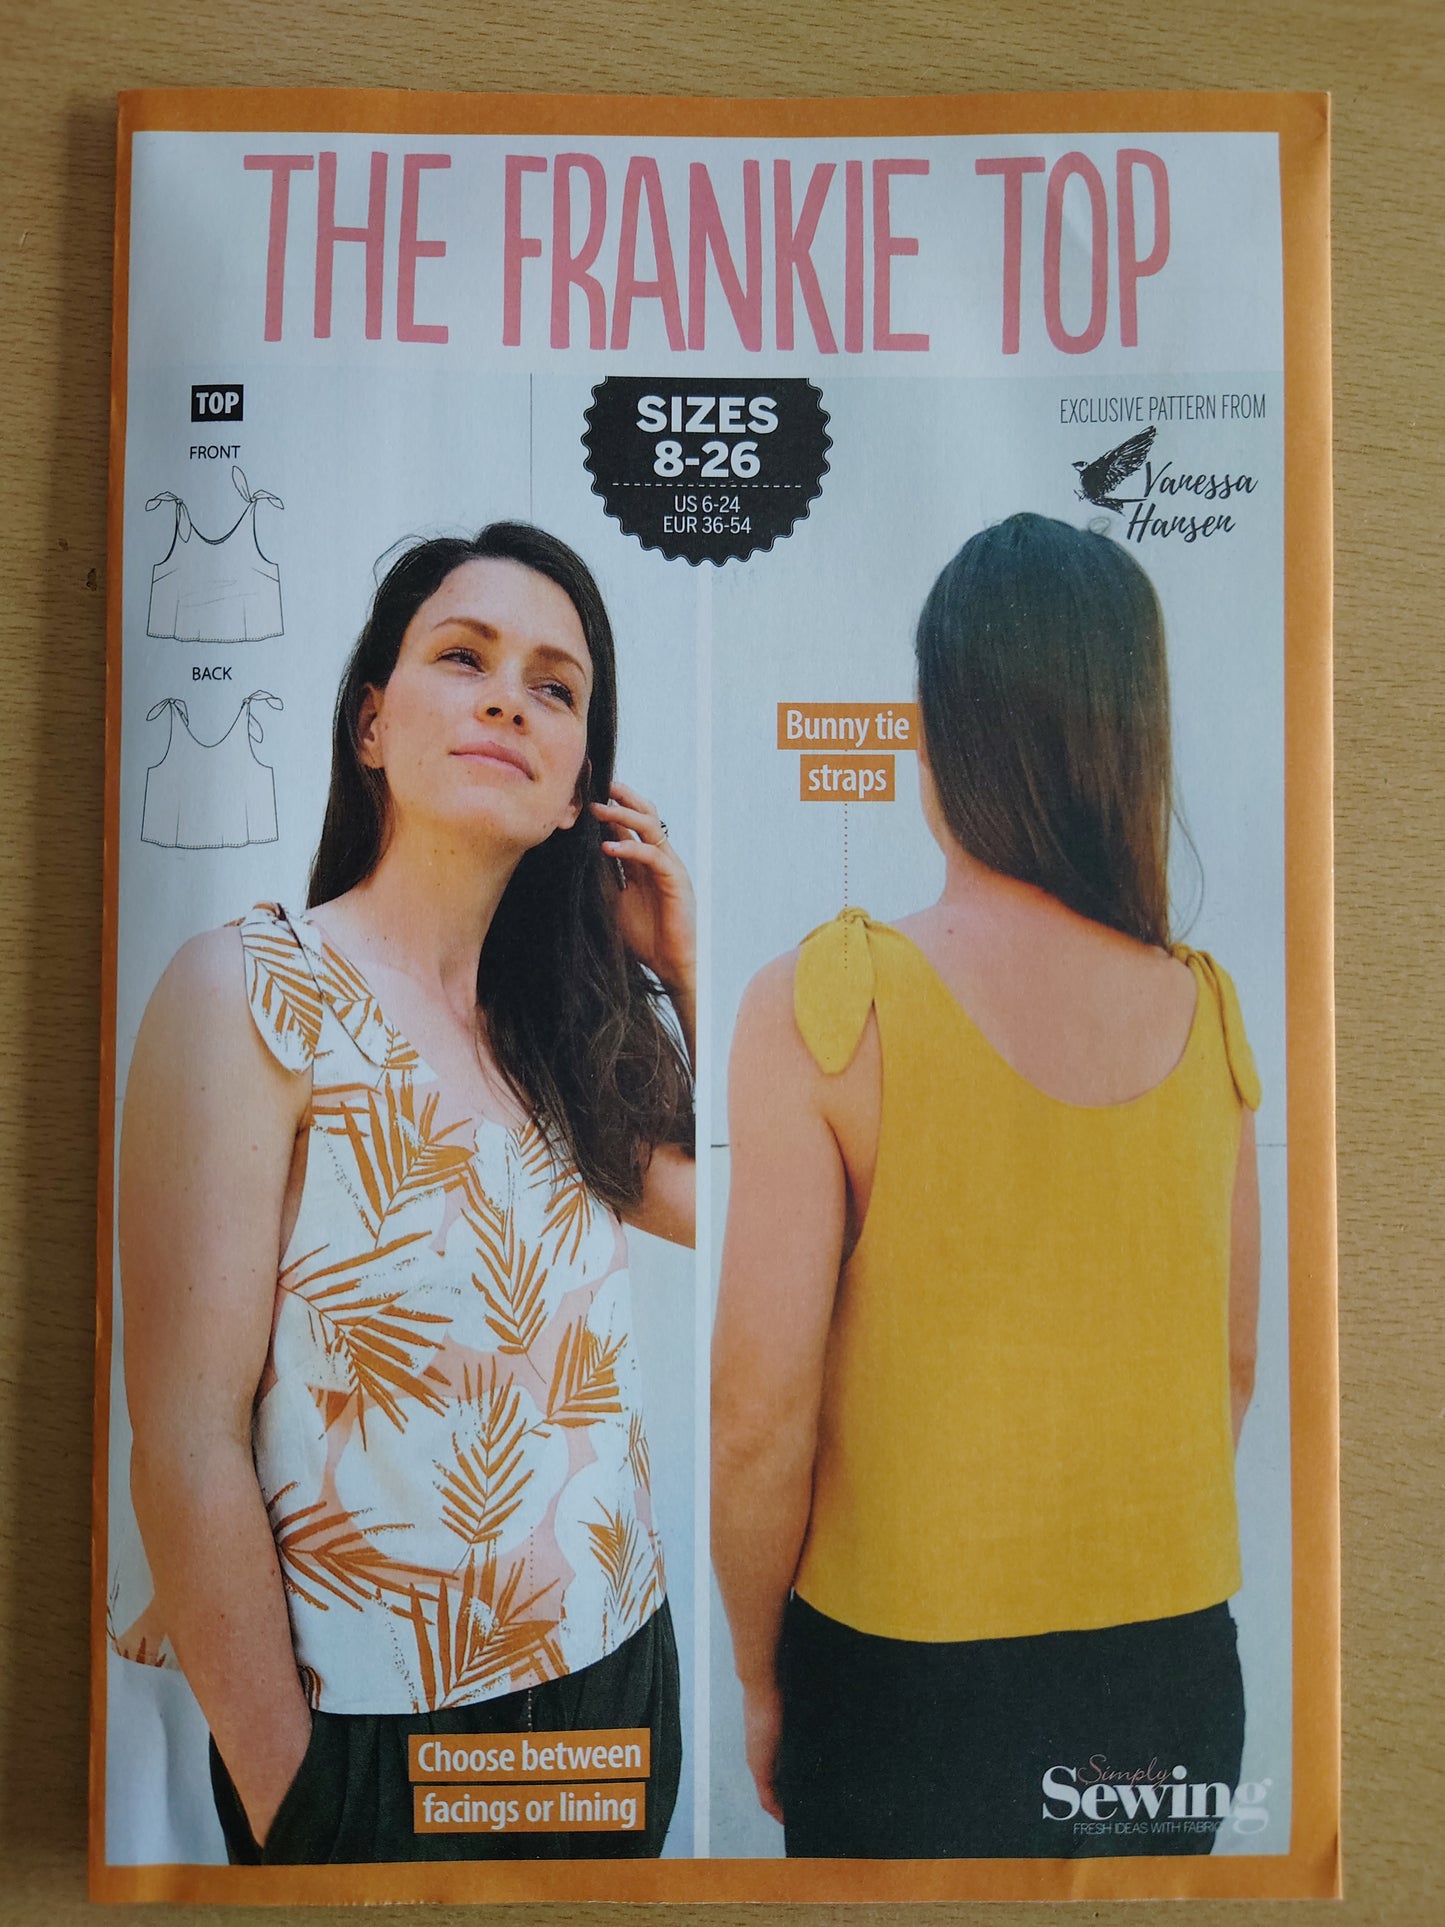 The Frankie Top